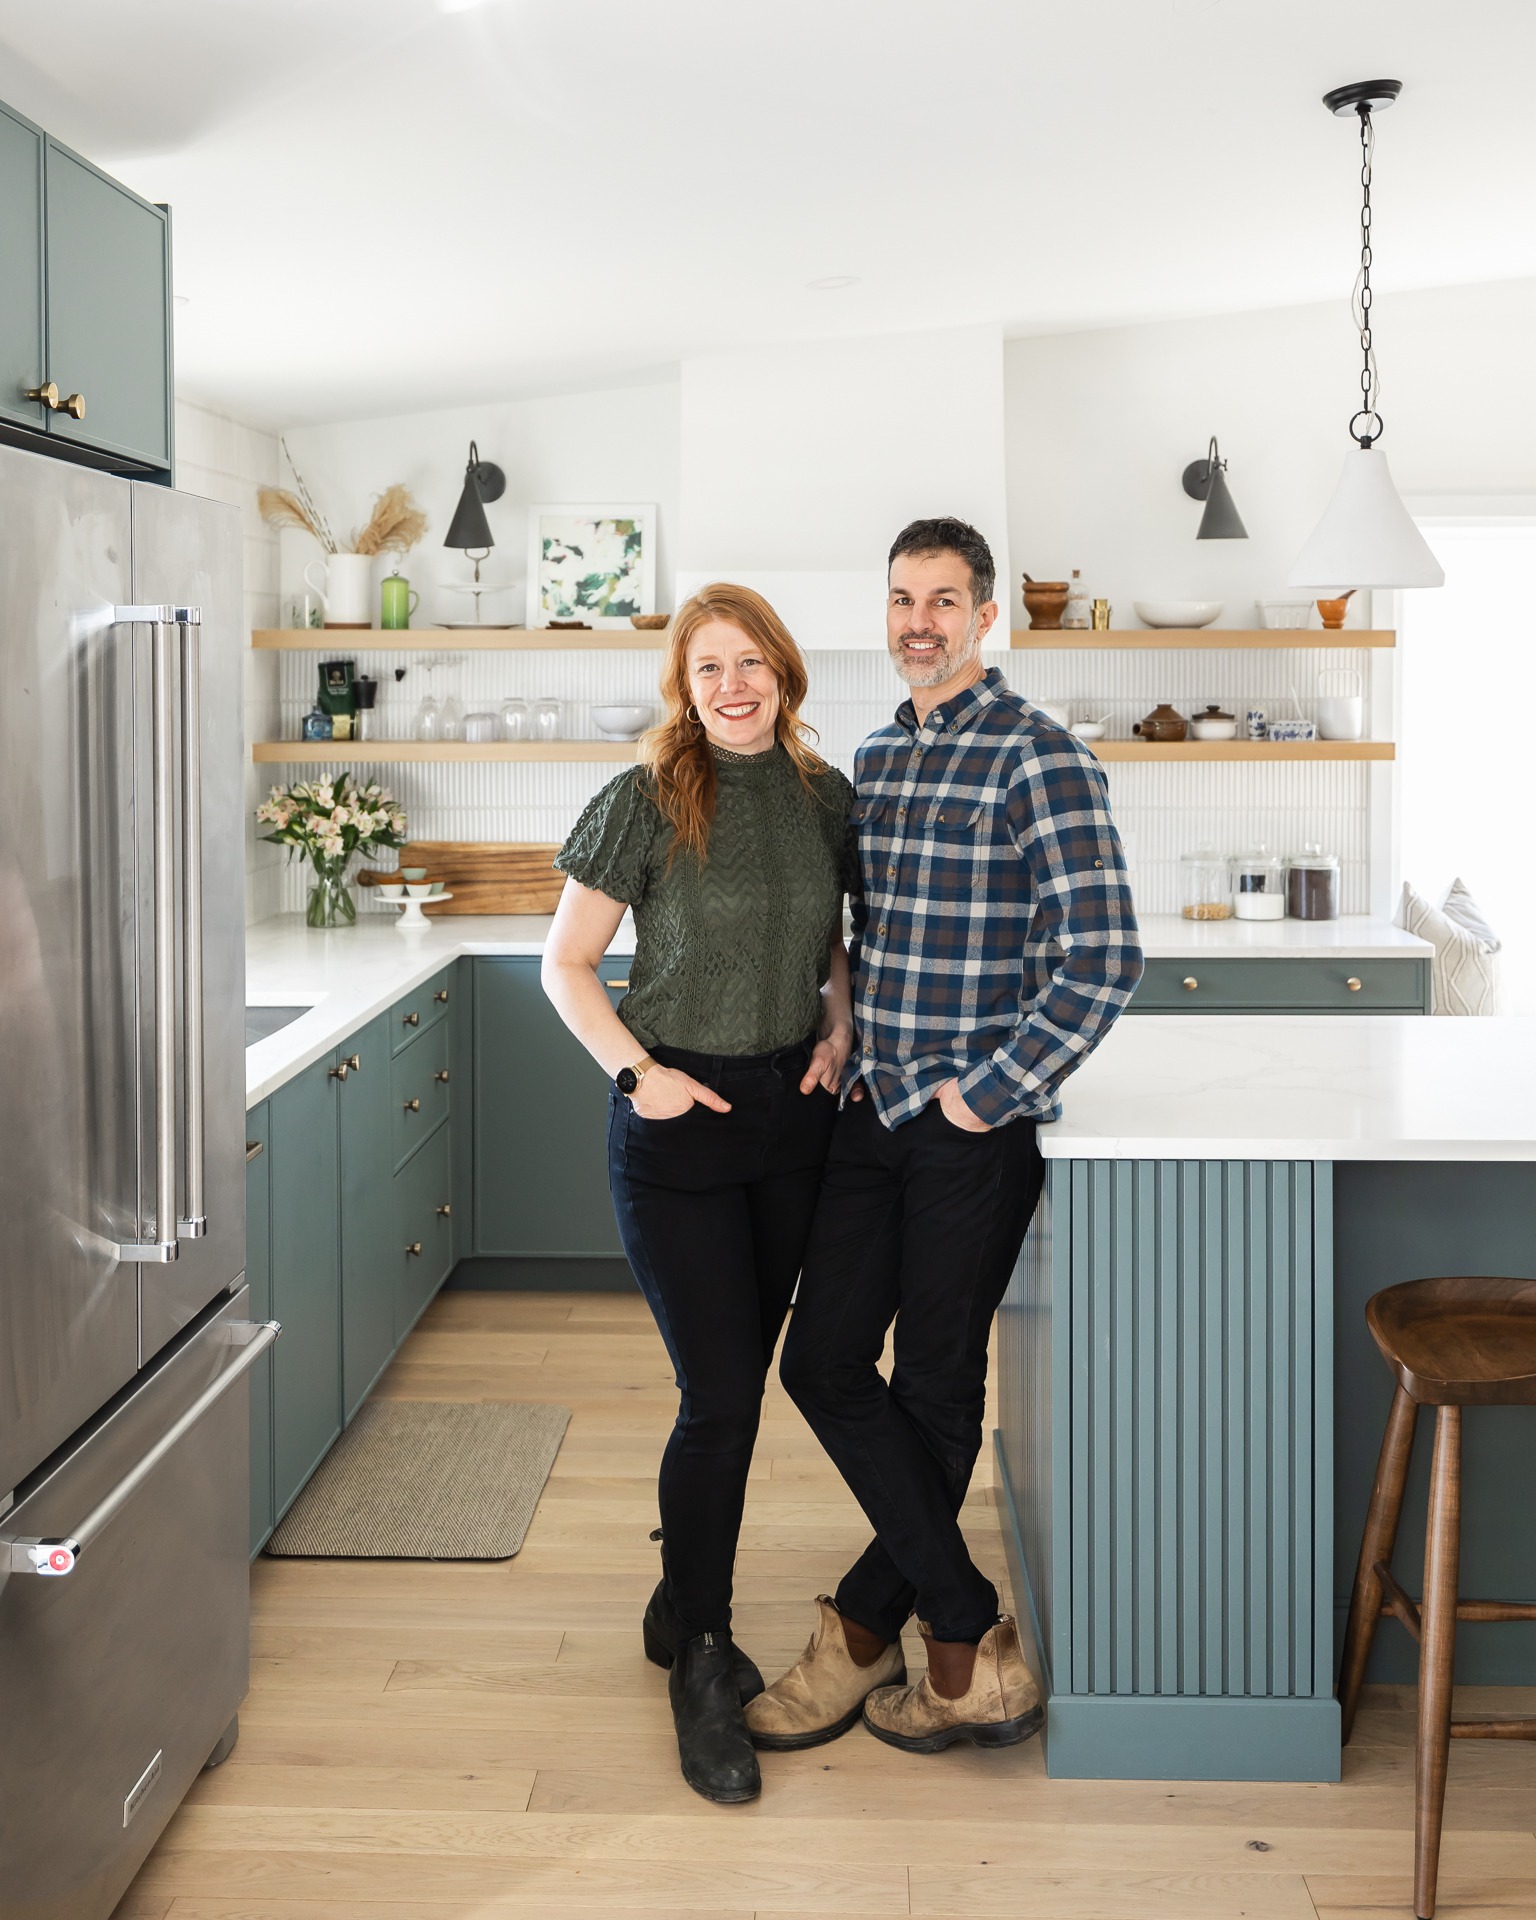 Two people are standing in a modern kitchen with teal cabinetry, smiling at the camera. There's an island, open shelves, and stainless steel appliances.